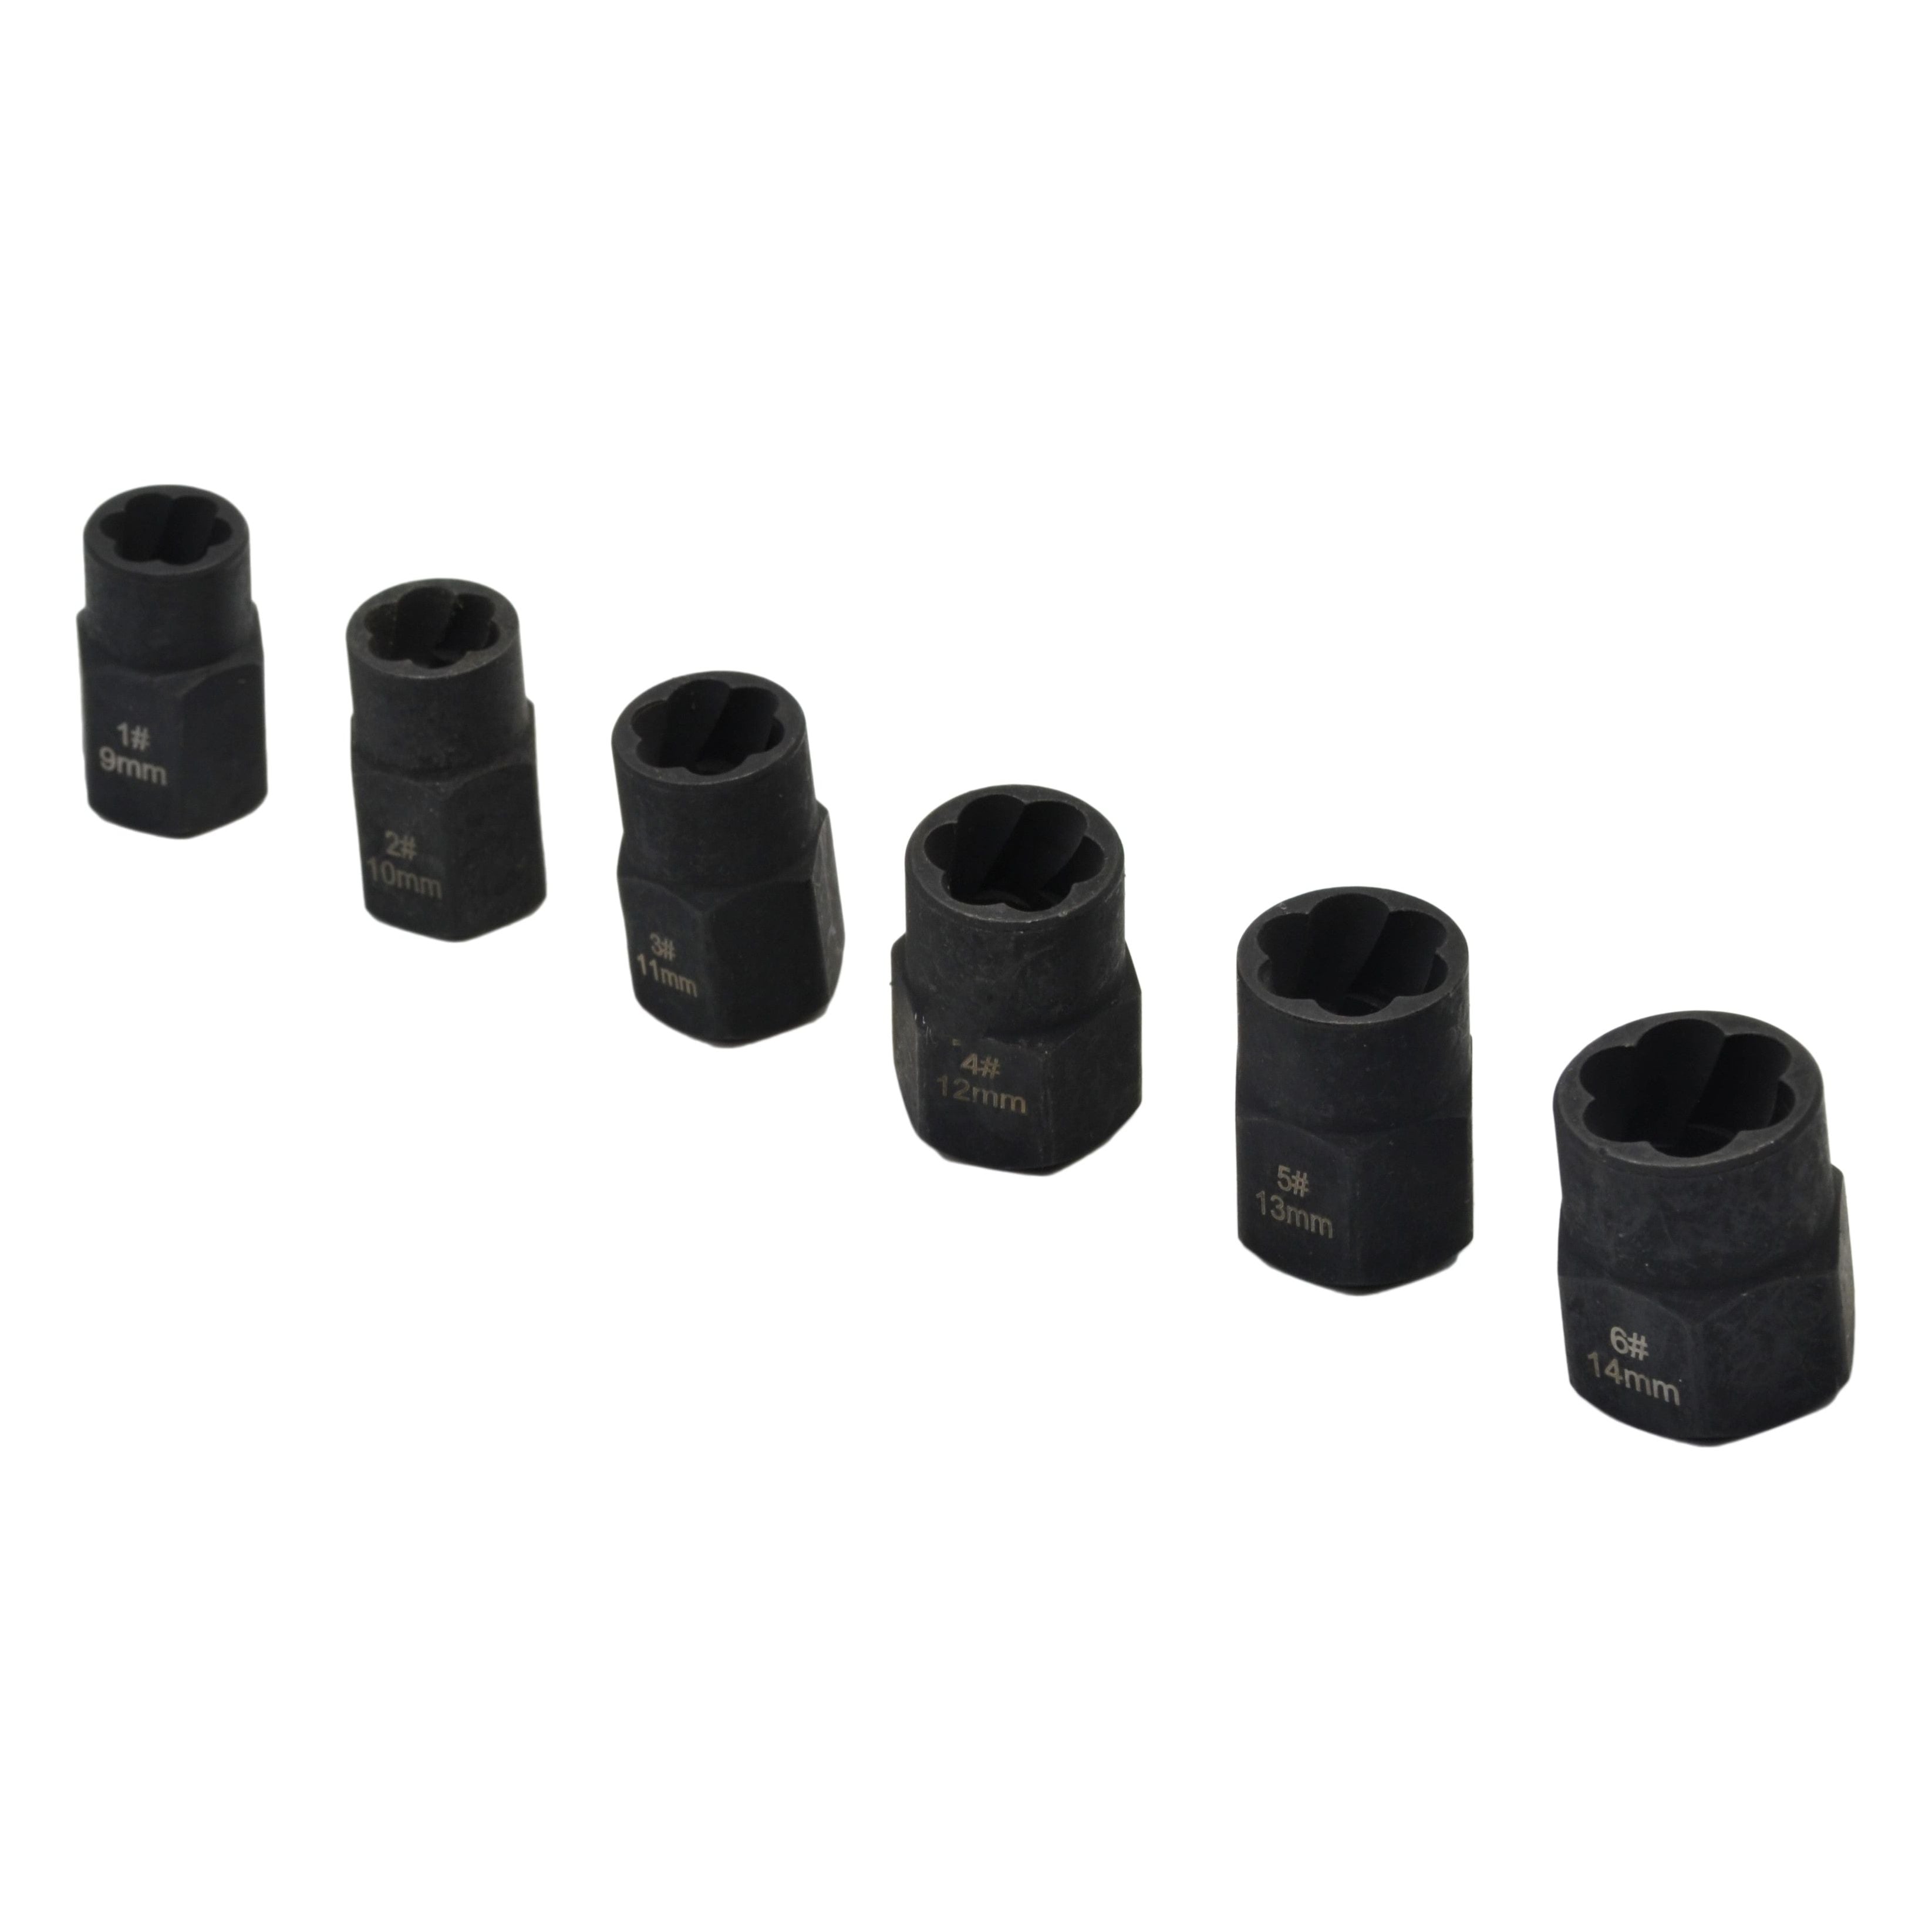 10 piece 3/8" Drive Damaged Bolt and Nut Extractor Set